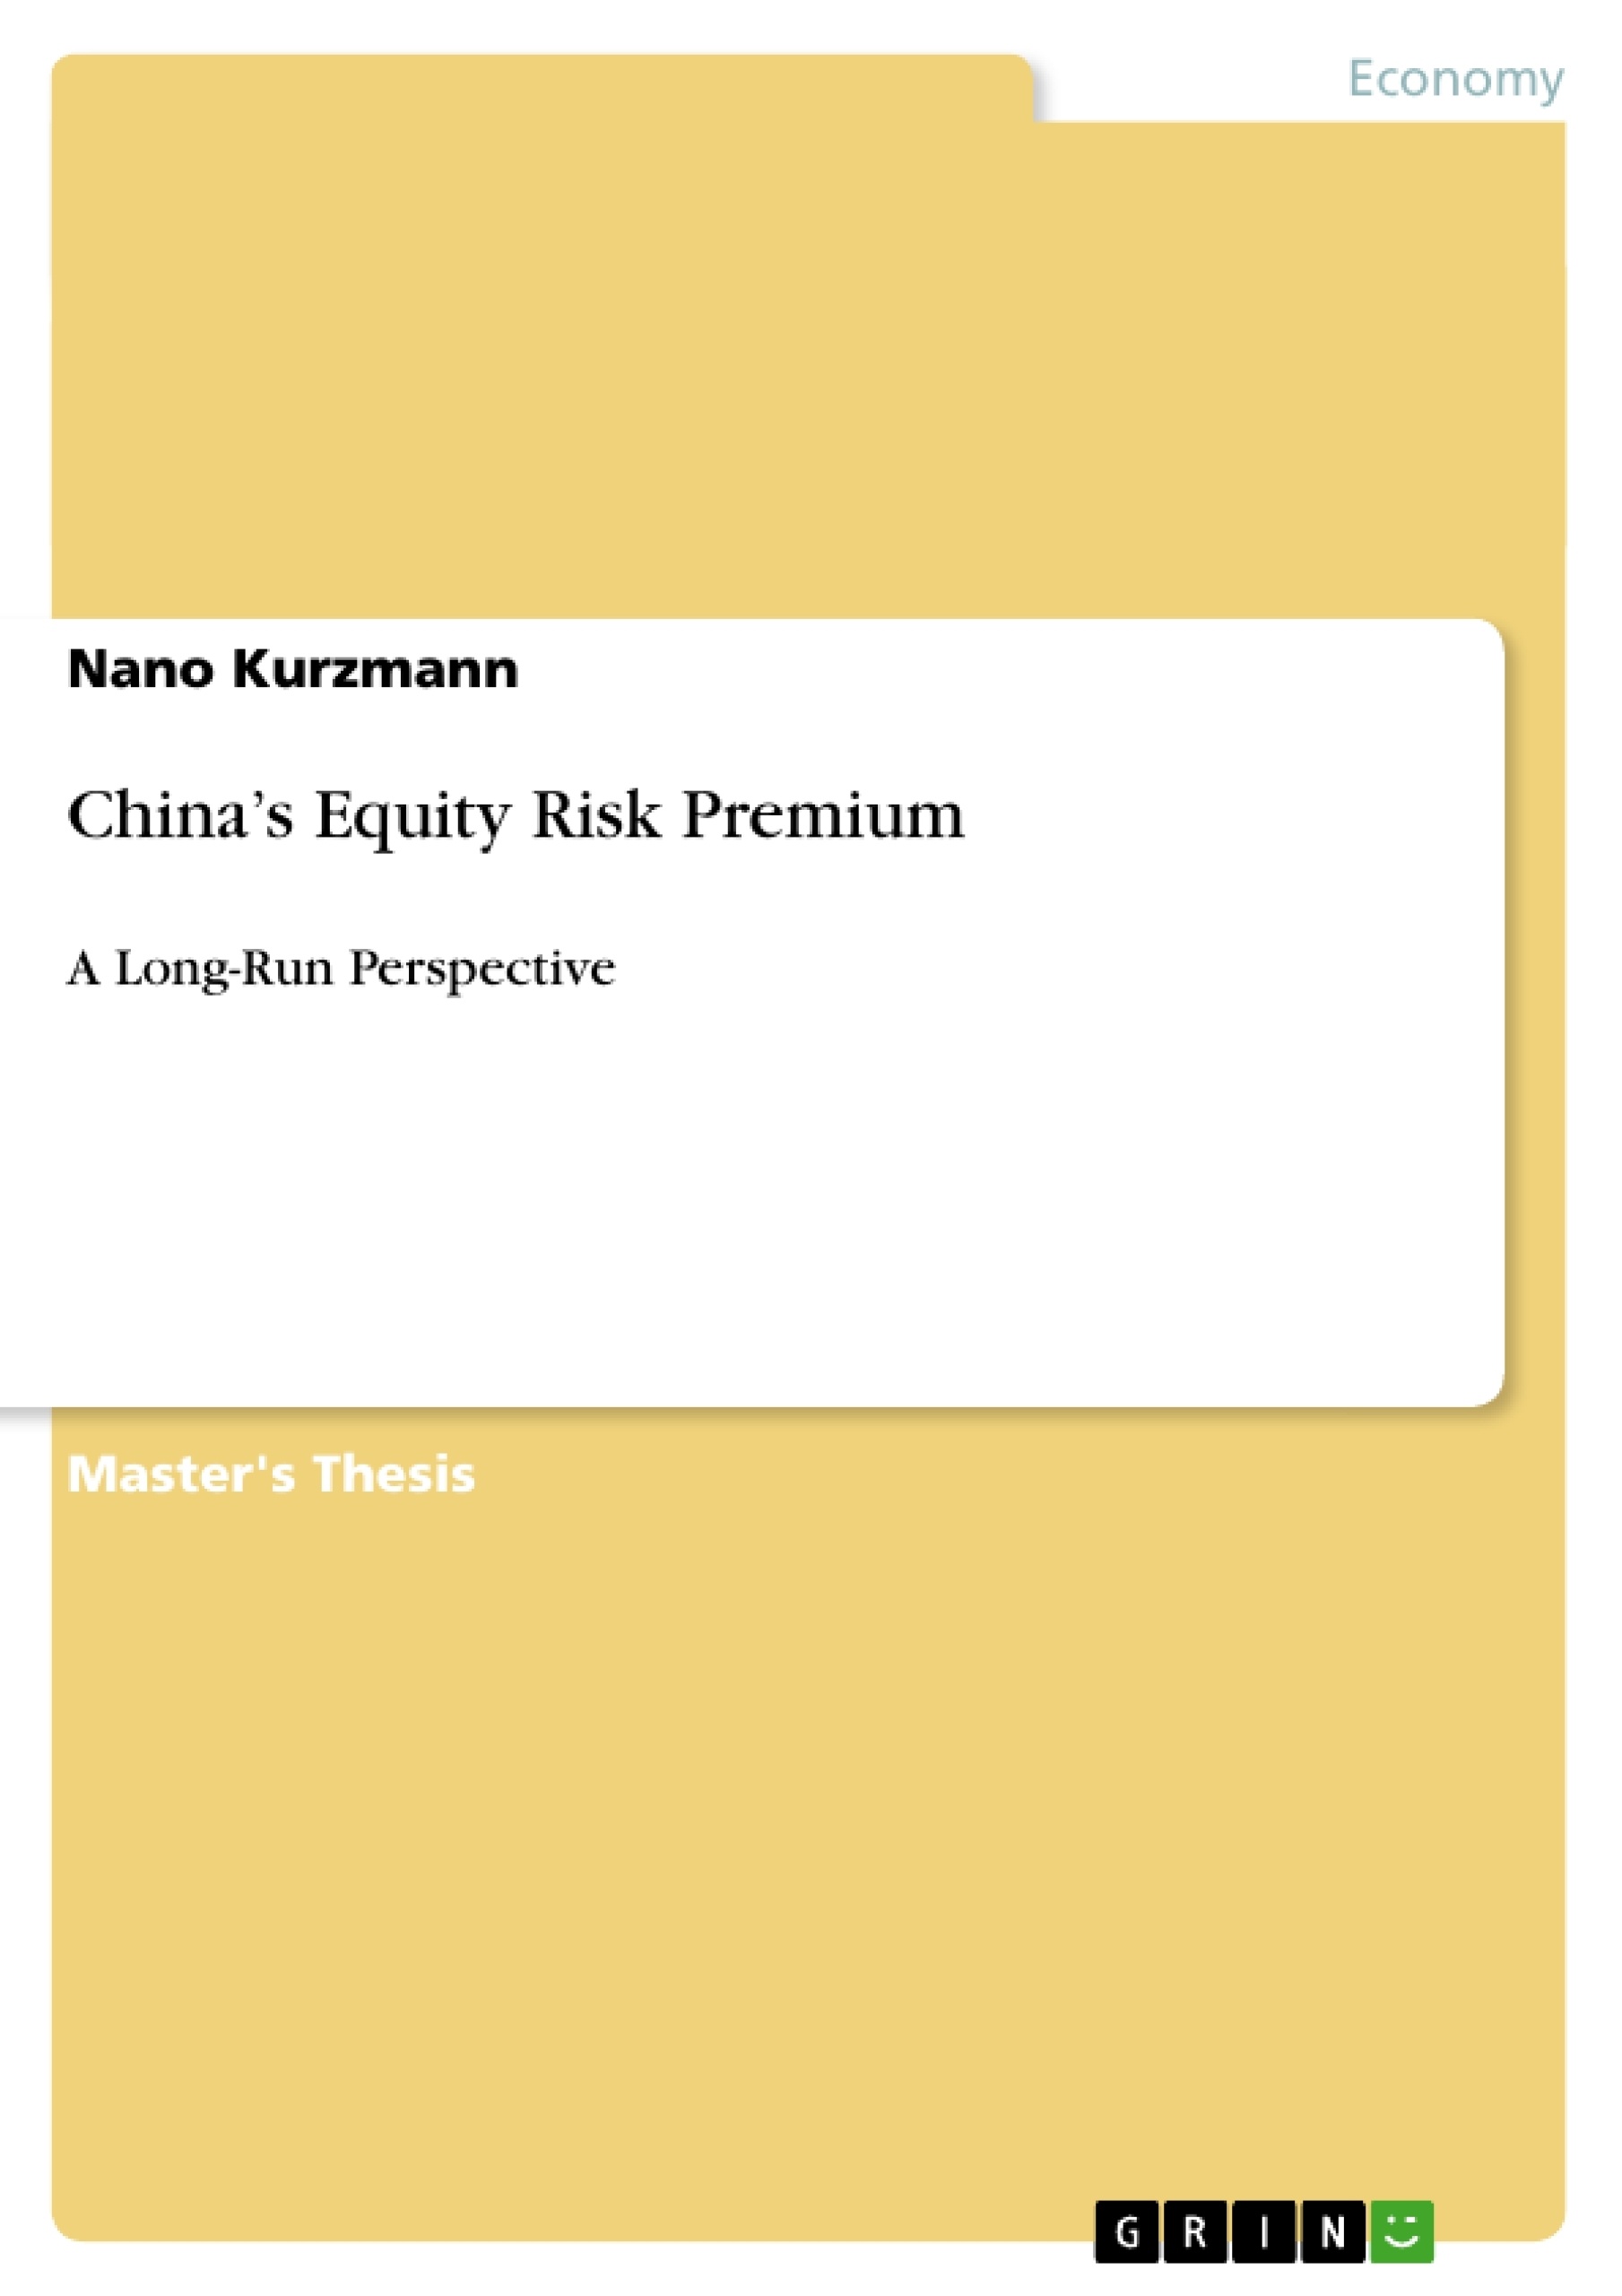 Title: China’s Equity Risk Premium